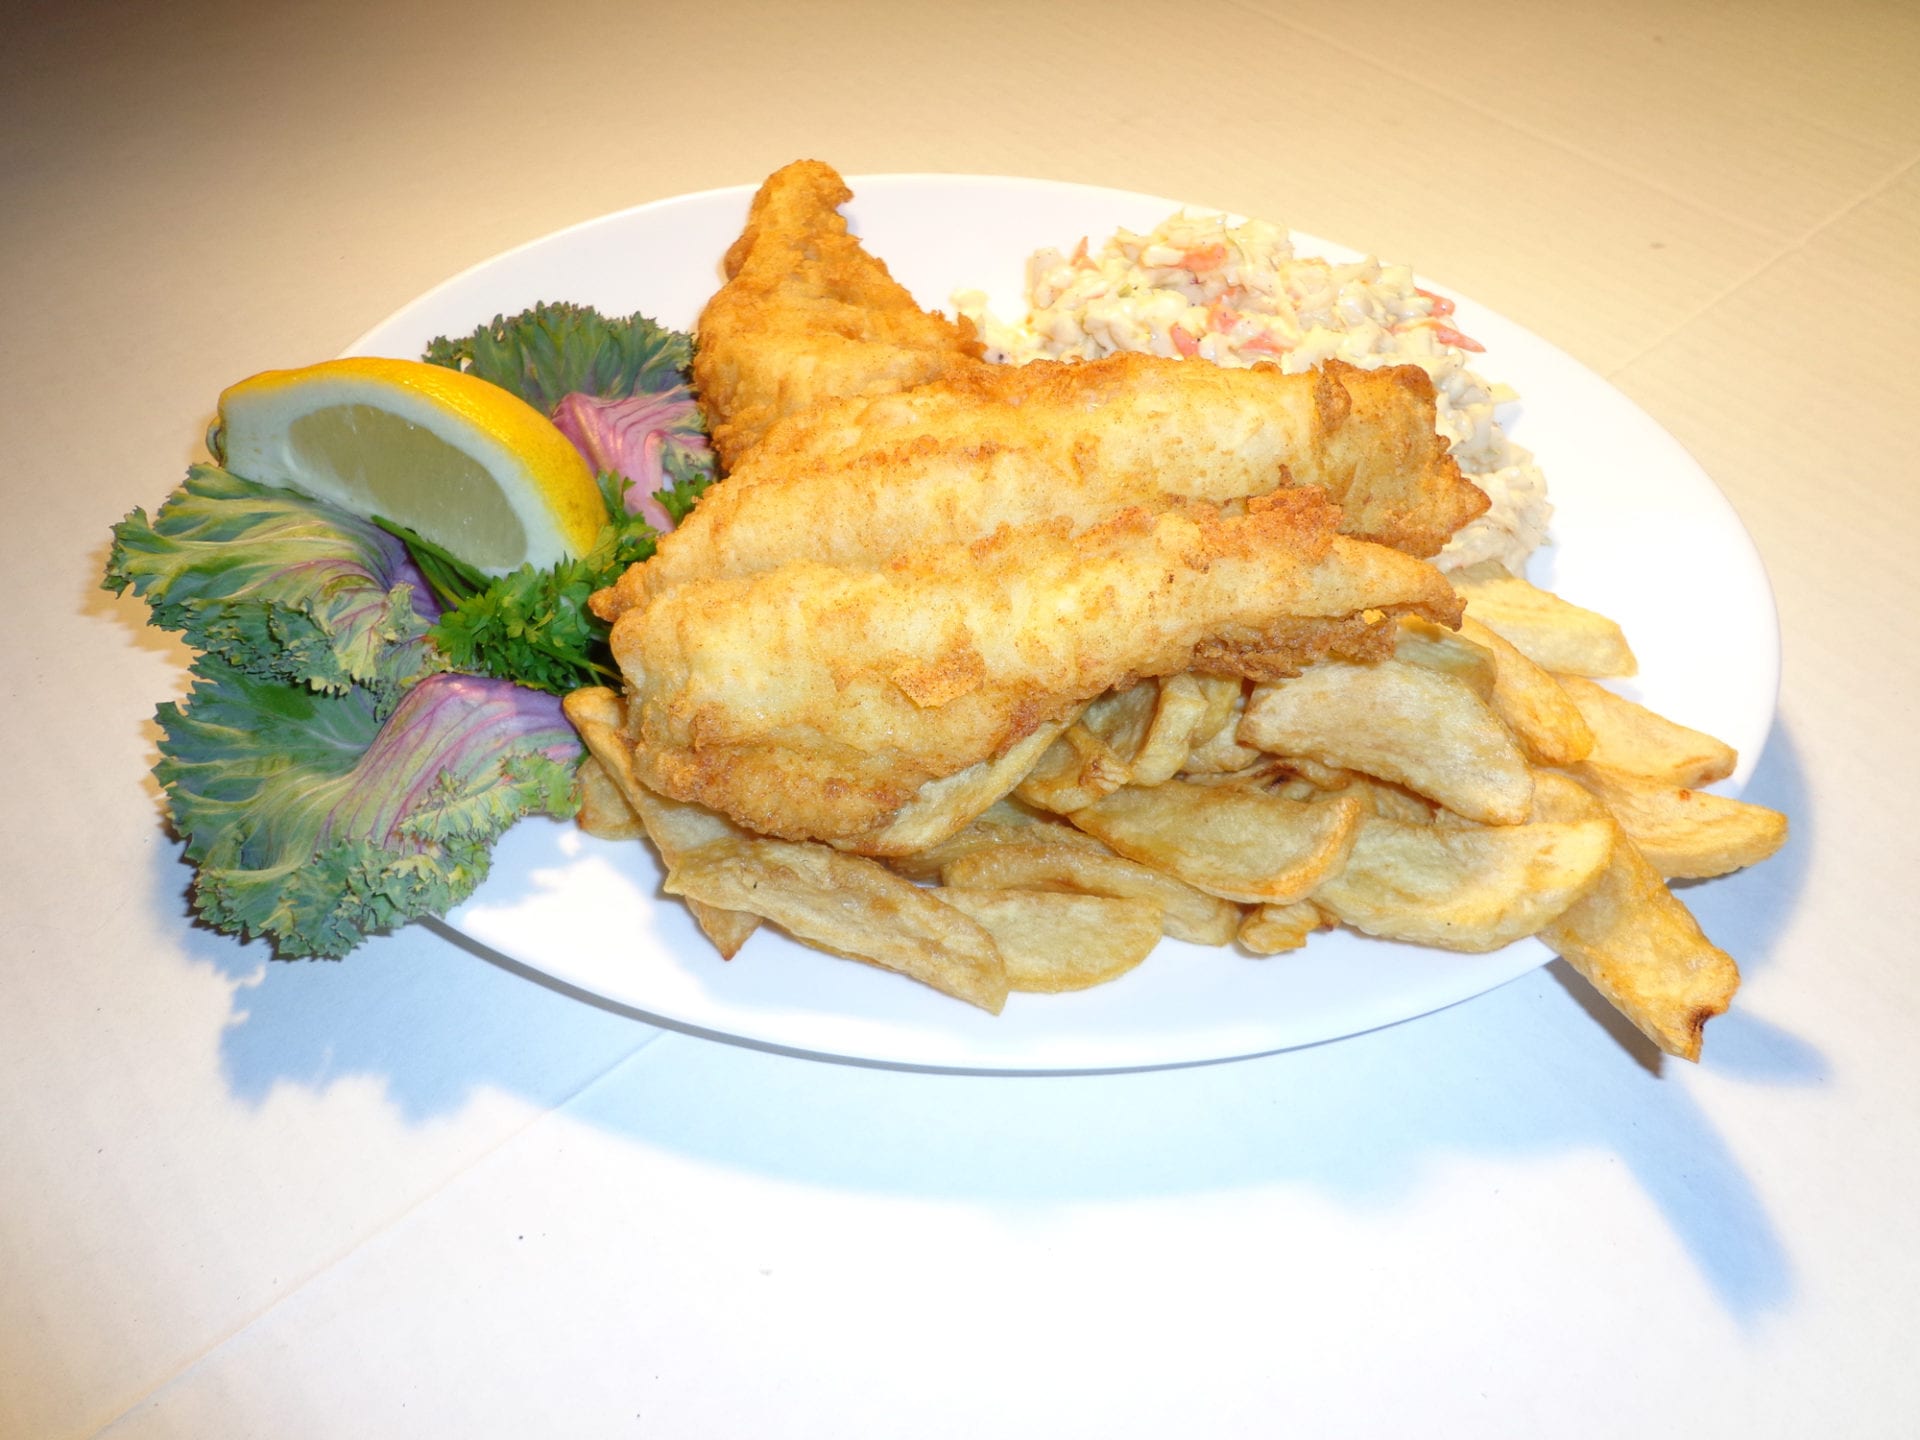 A Fried Fish Slice With Chips on a Plate